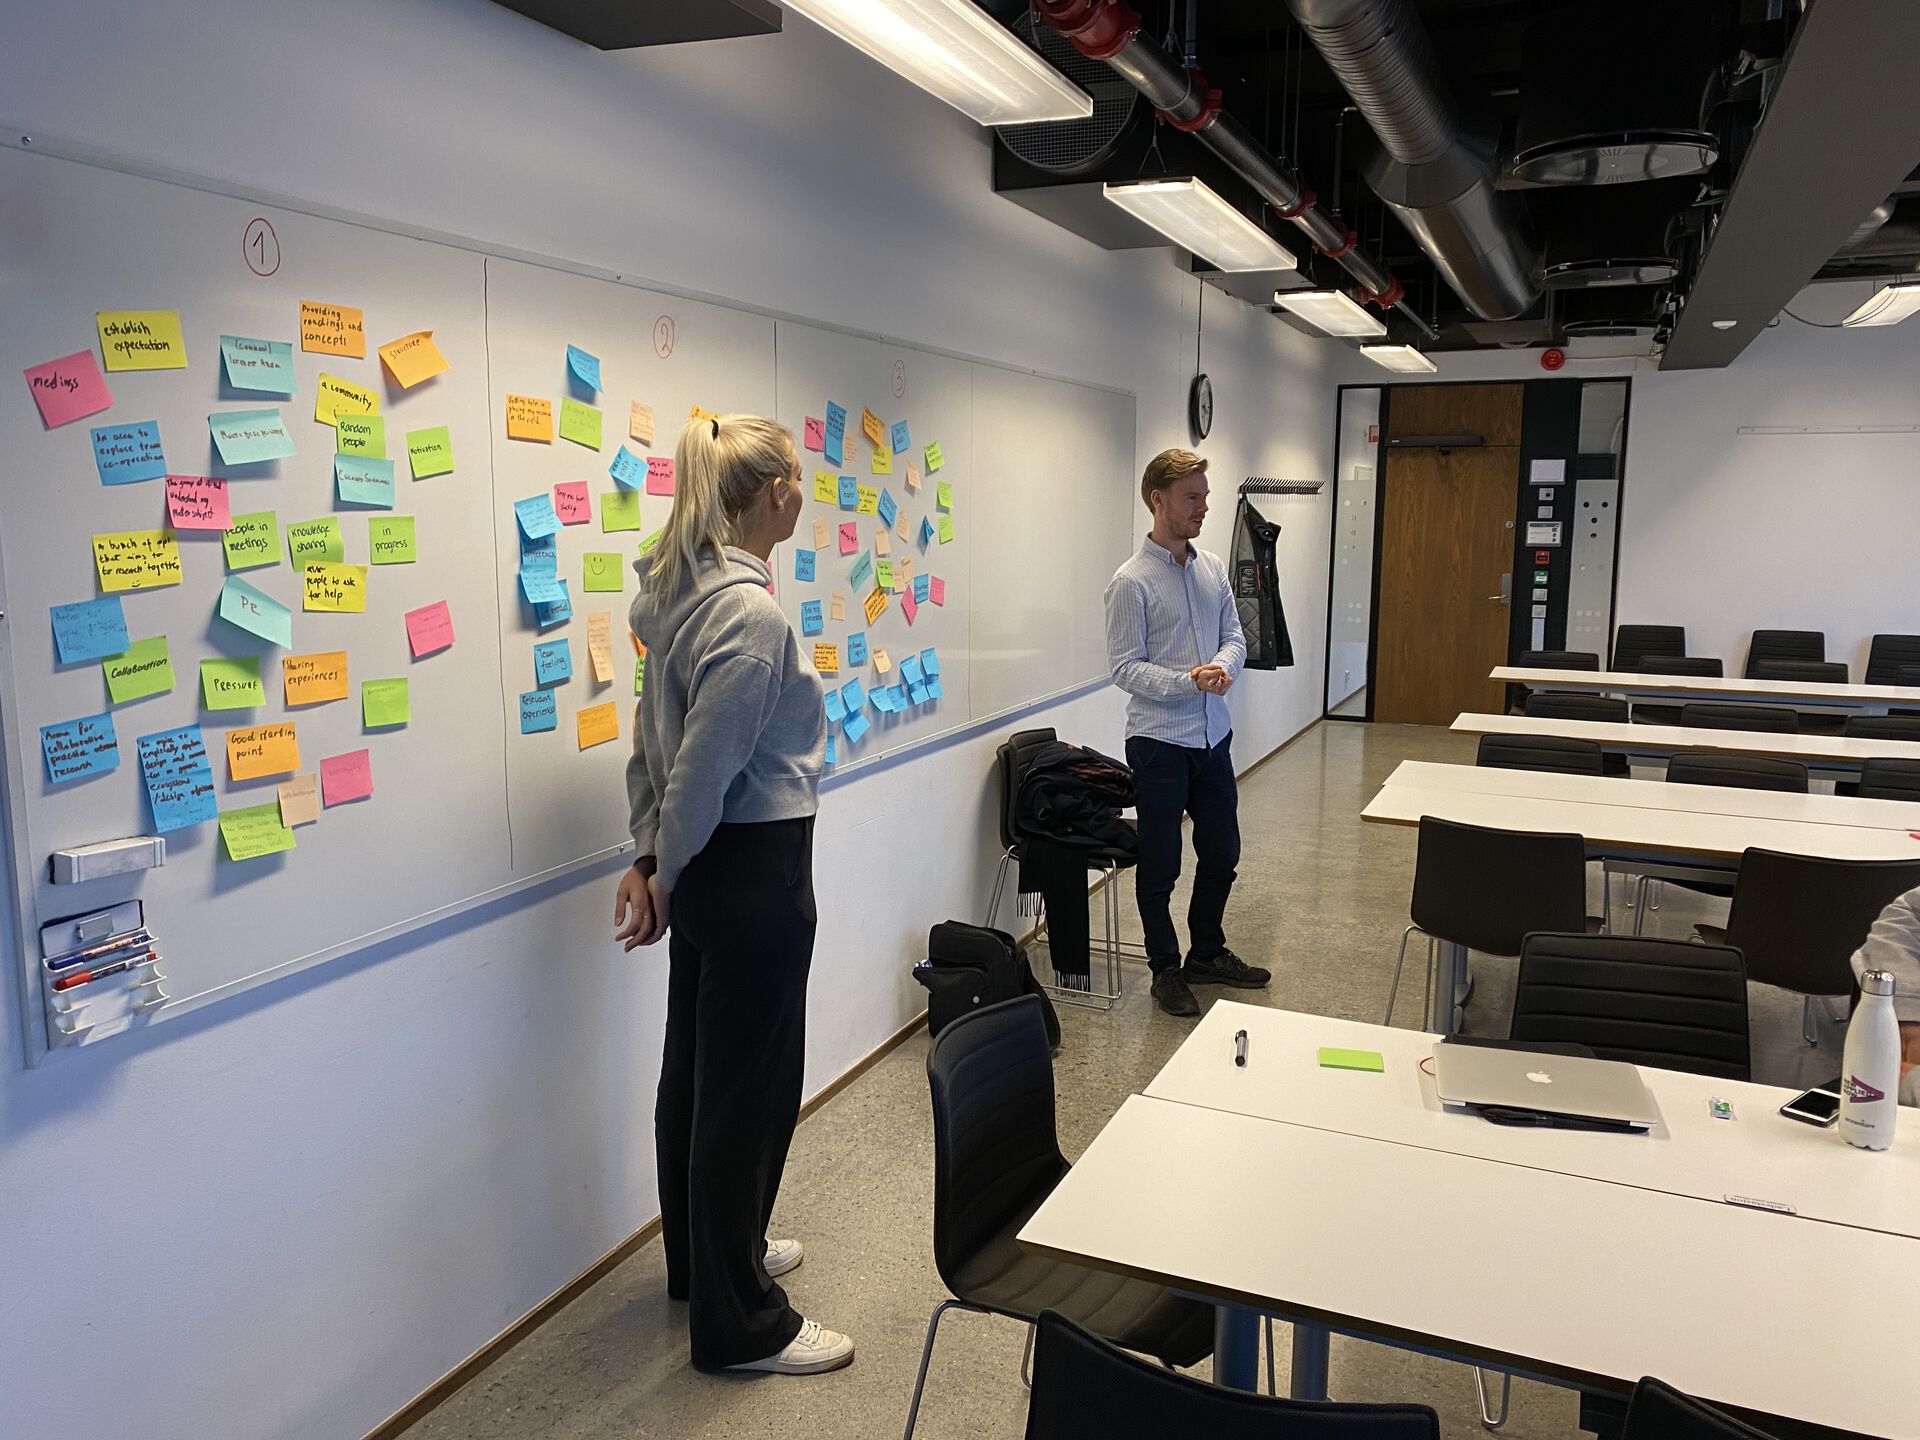 two people discussing post-it notes on a whiteboard